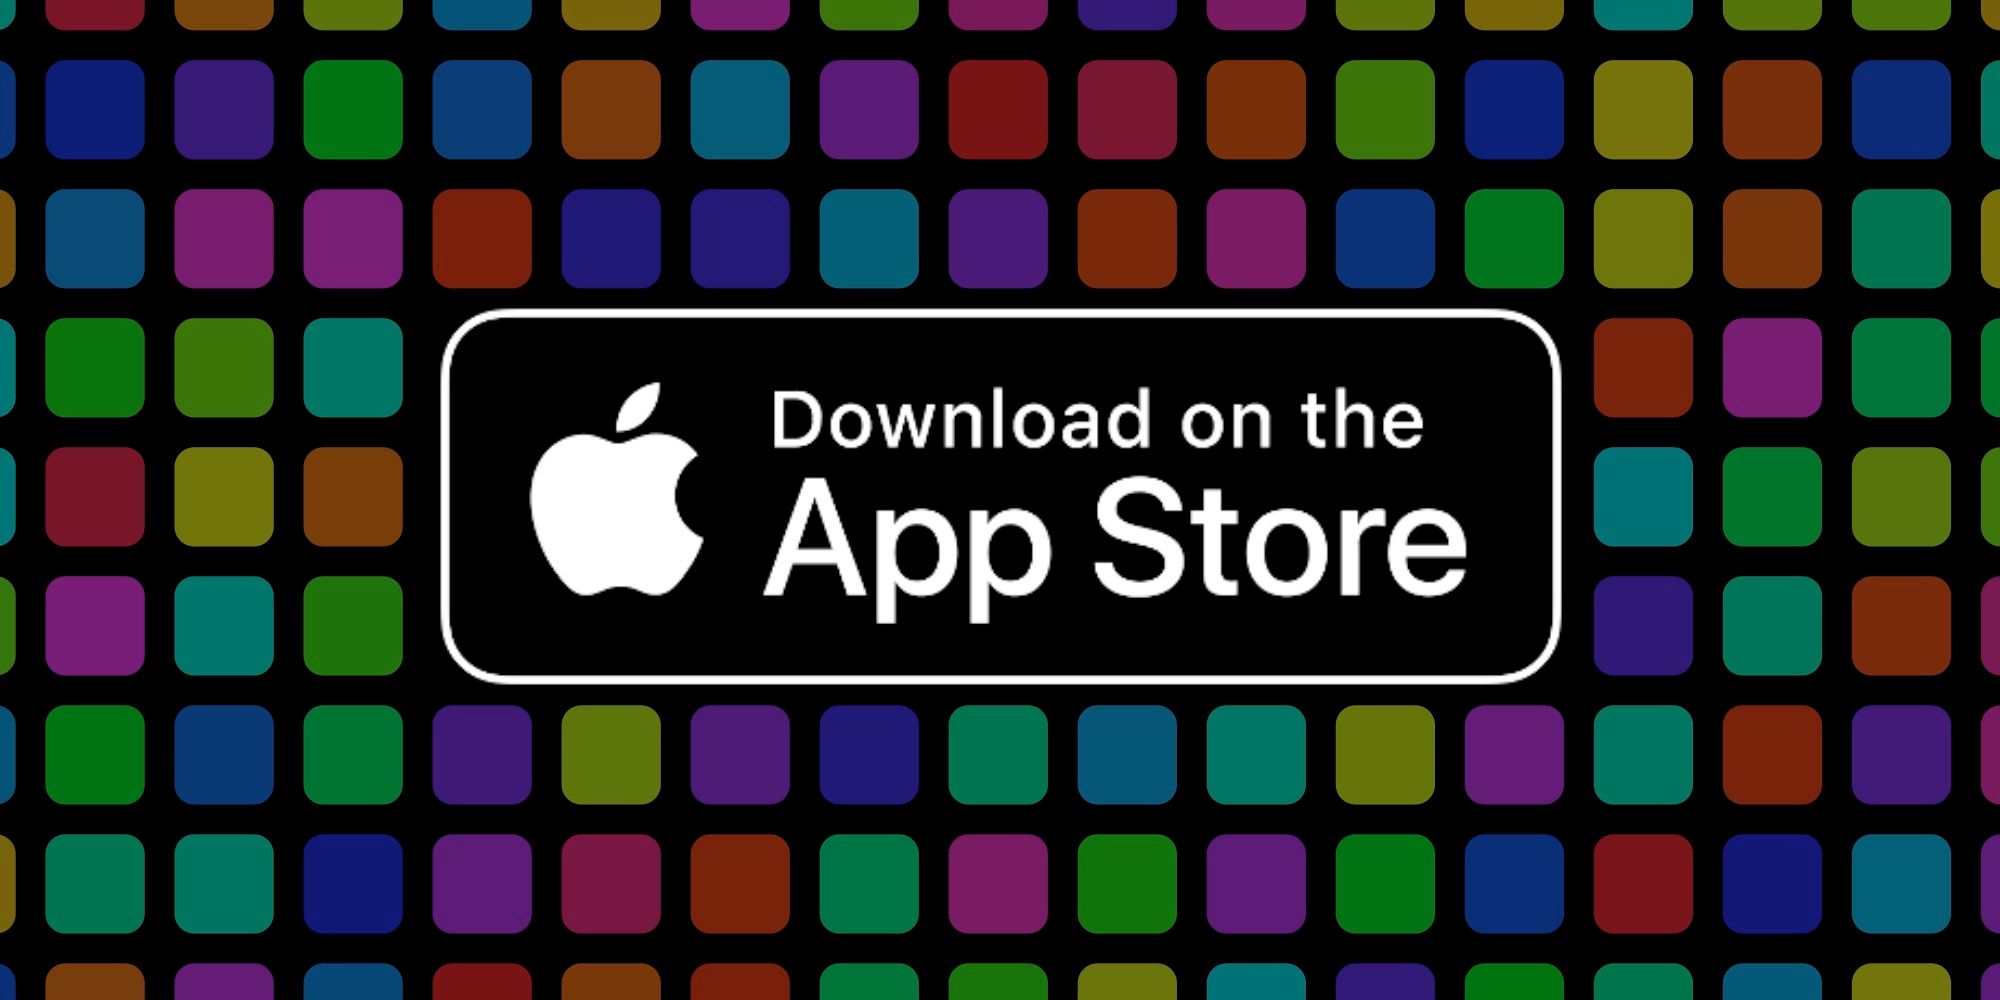 An image of the Apple app store logo